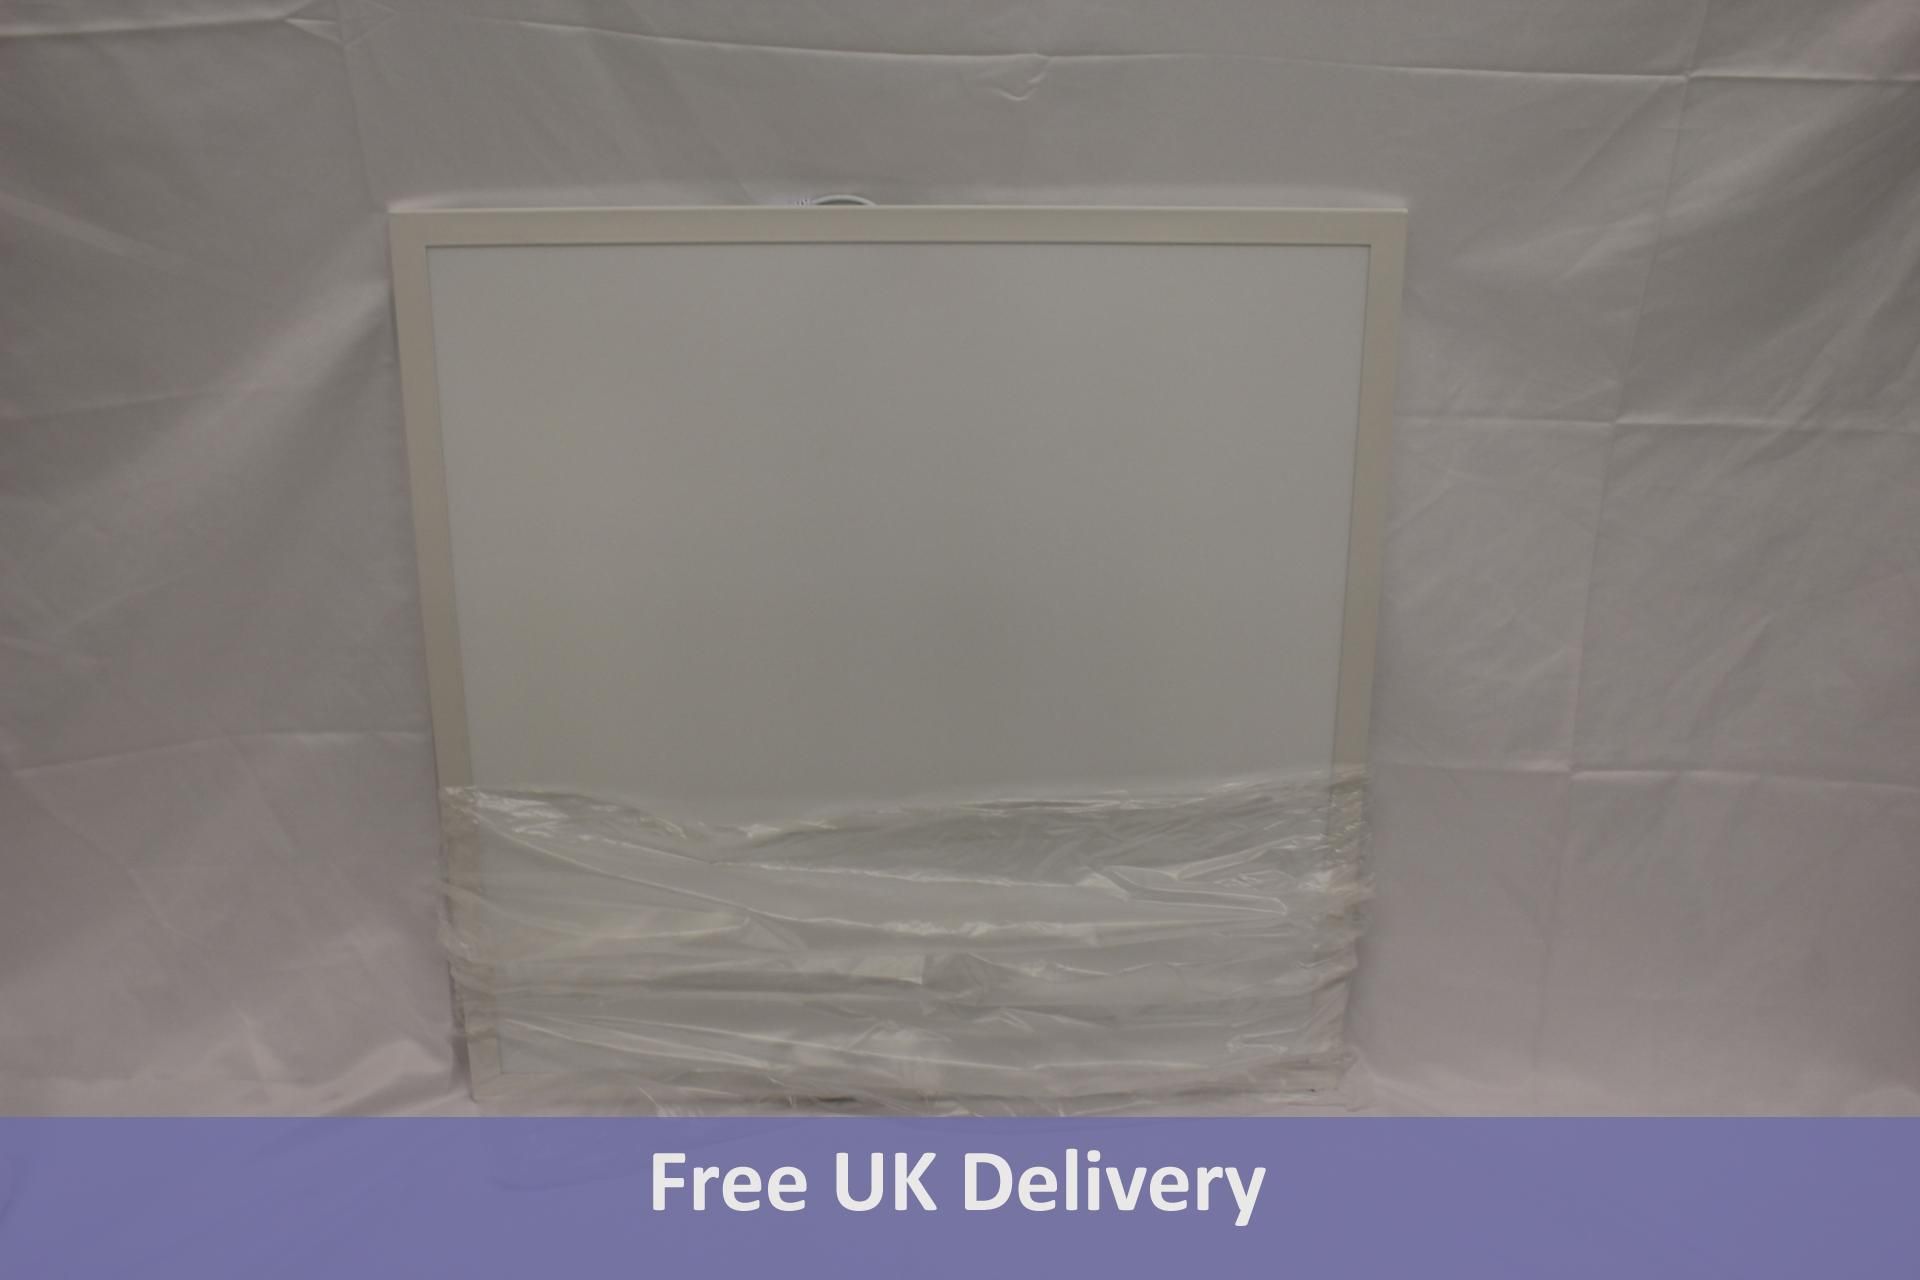 Bright Source 40W LED Panel 4000K, Cool White, Size 600mm x 600mm